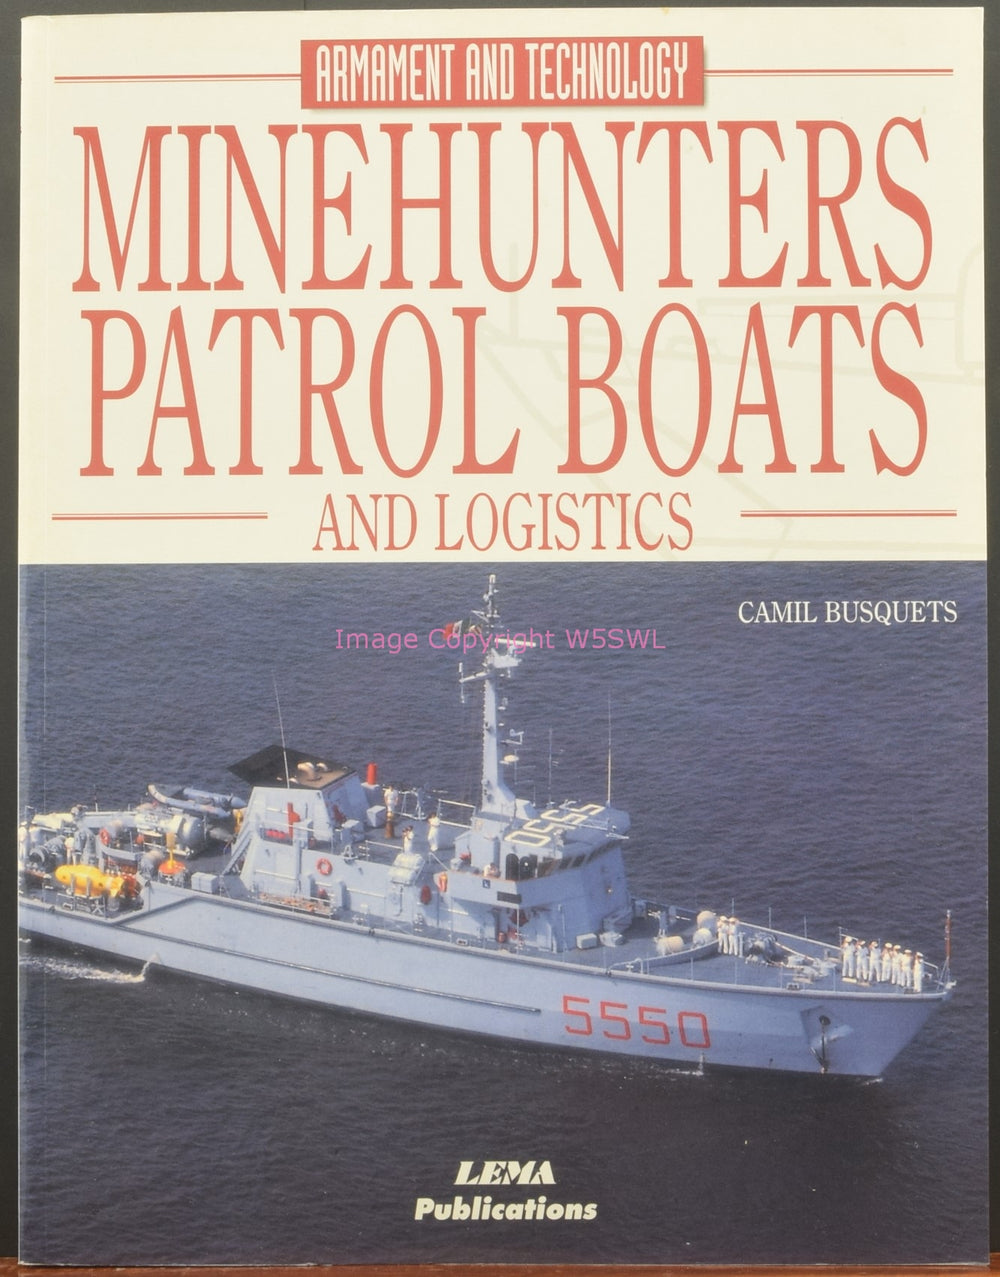 Minehunters Patrol Boats and Logistics by Camil Busquets - Dave's Hobby Shop by W5SWL